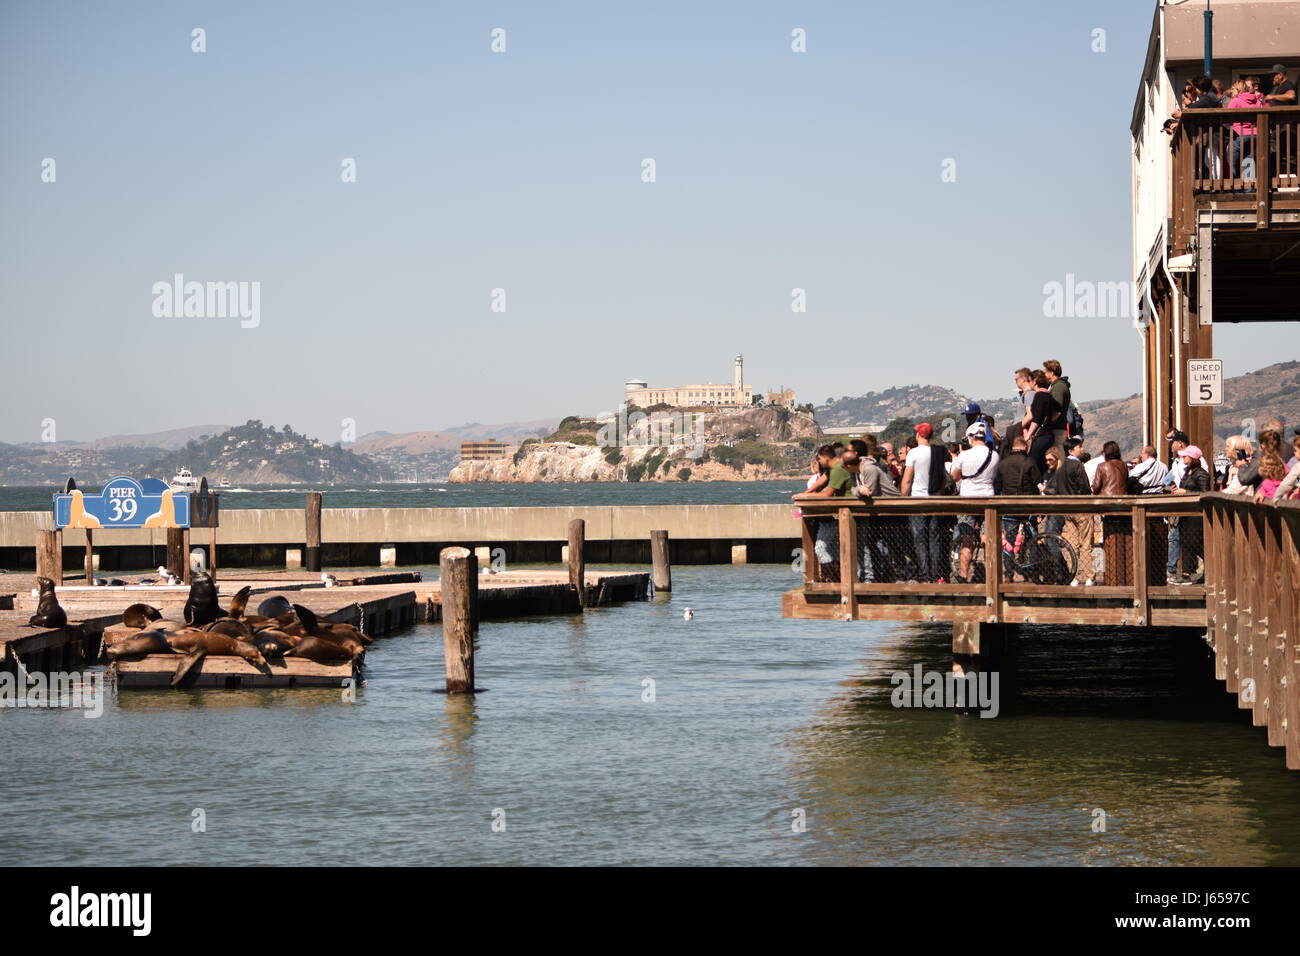 Tourists taking pictures of seals at Pier 39, San Francisco Stock Photo